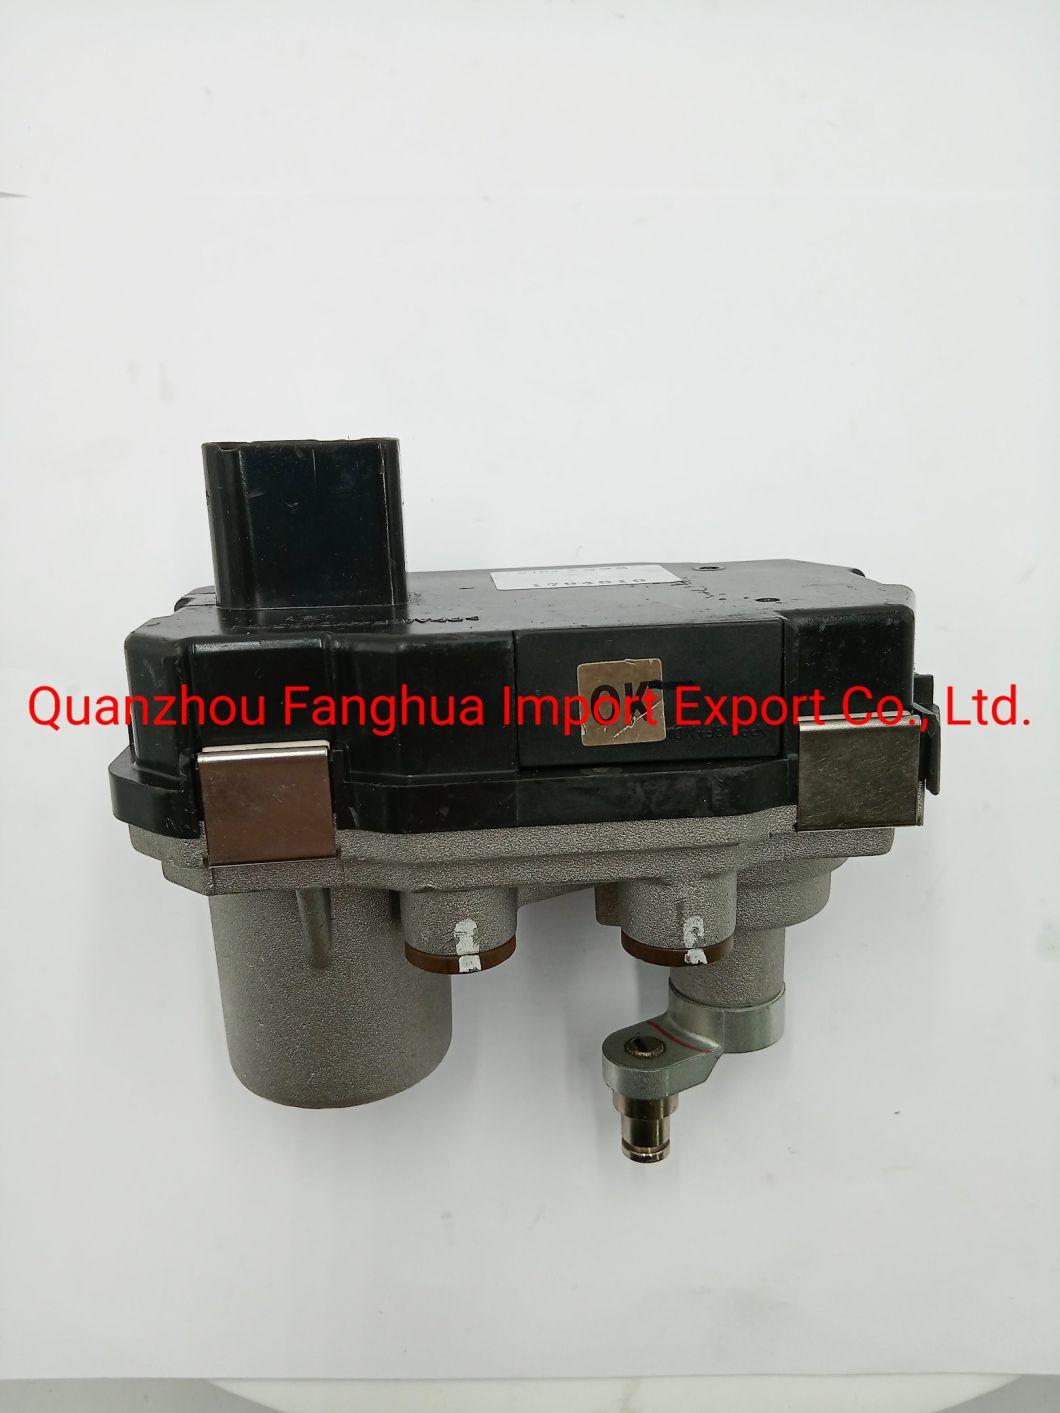 High Quality 6719920295 Turbocharger Parts Turbocharger Actuator Assy for Sale